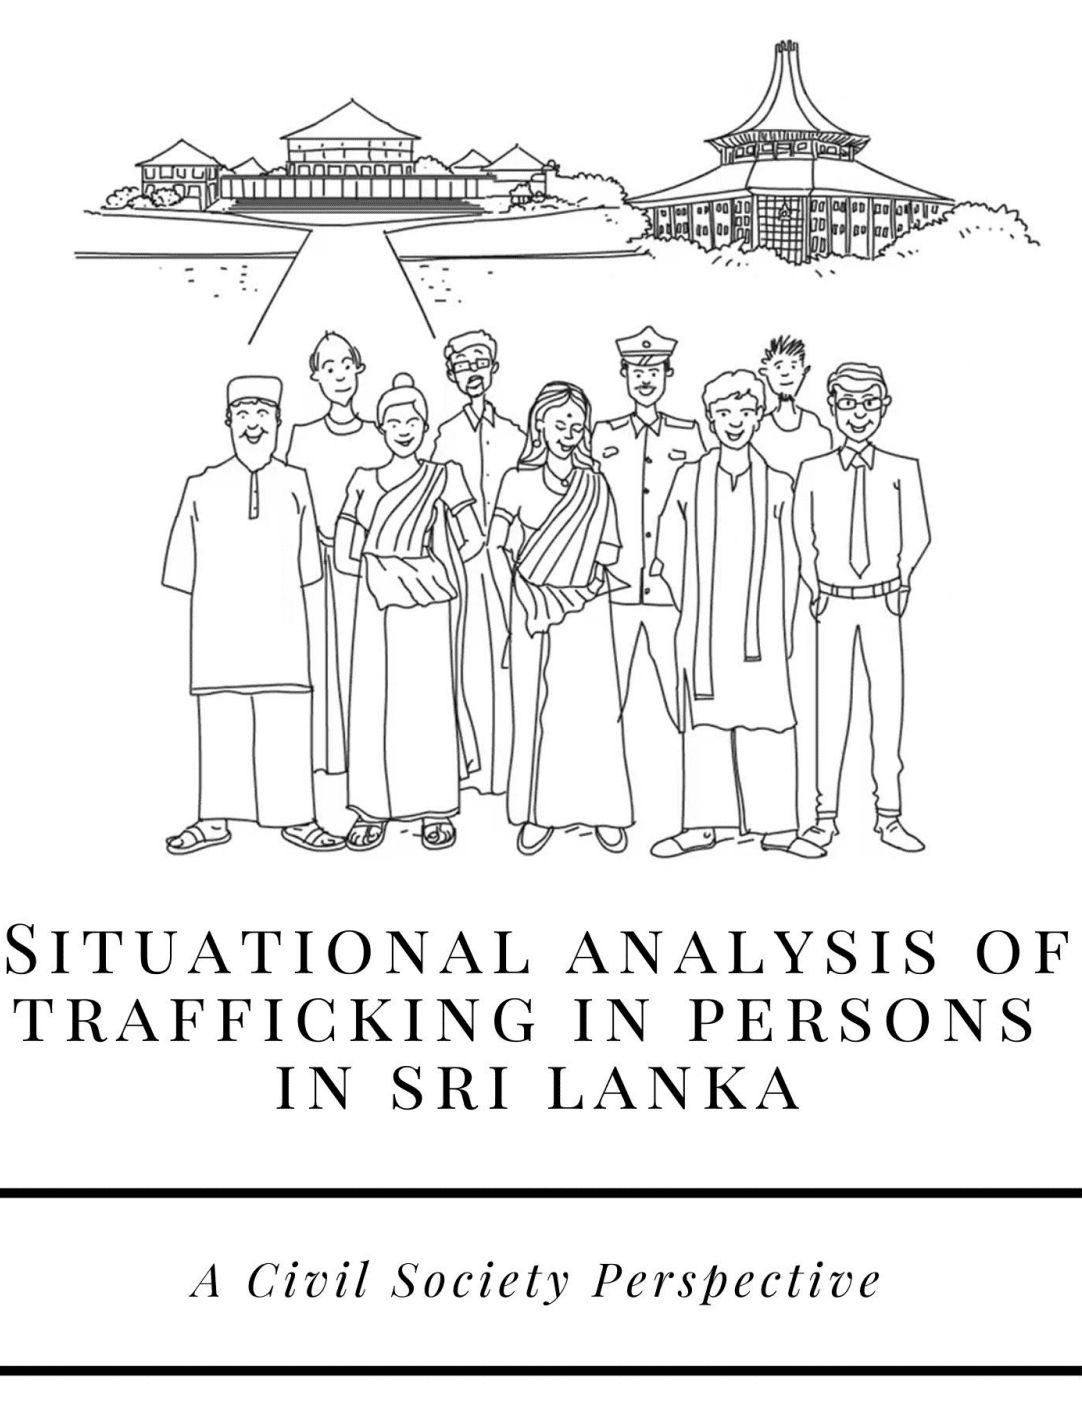 Situational Analysis of Trafficking in Persons in Sri Lanka